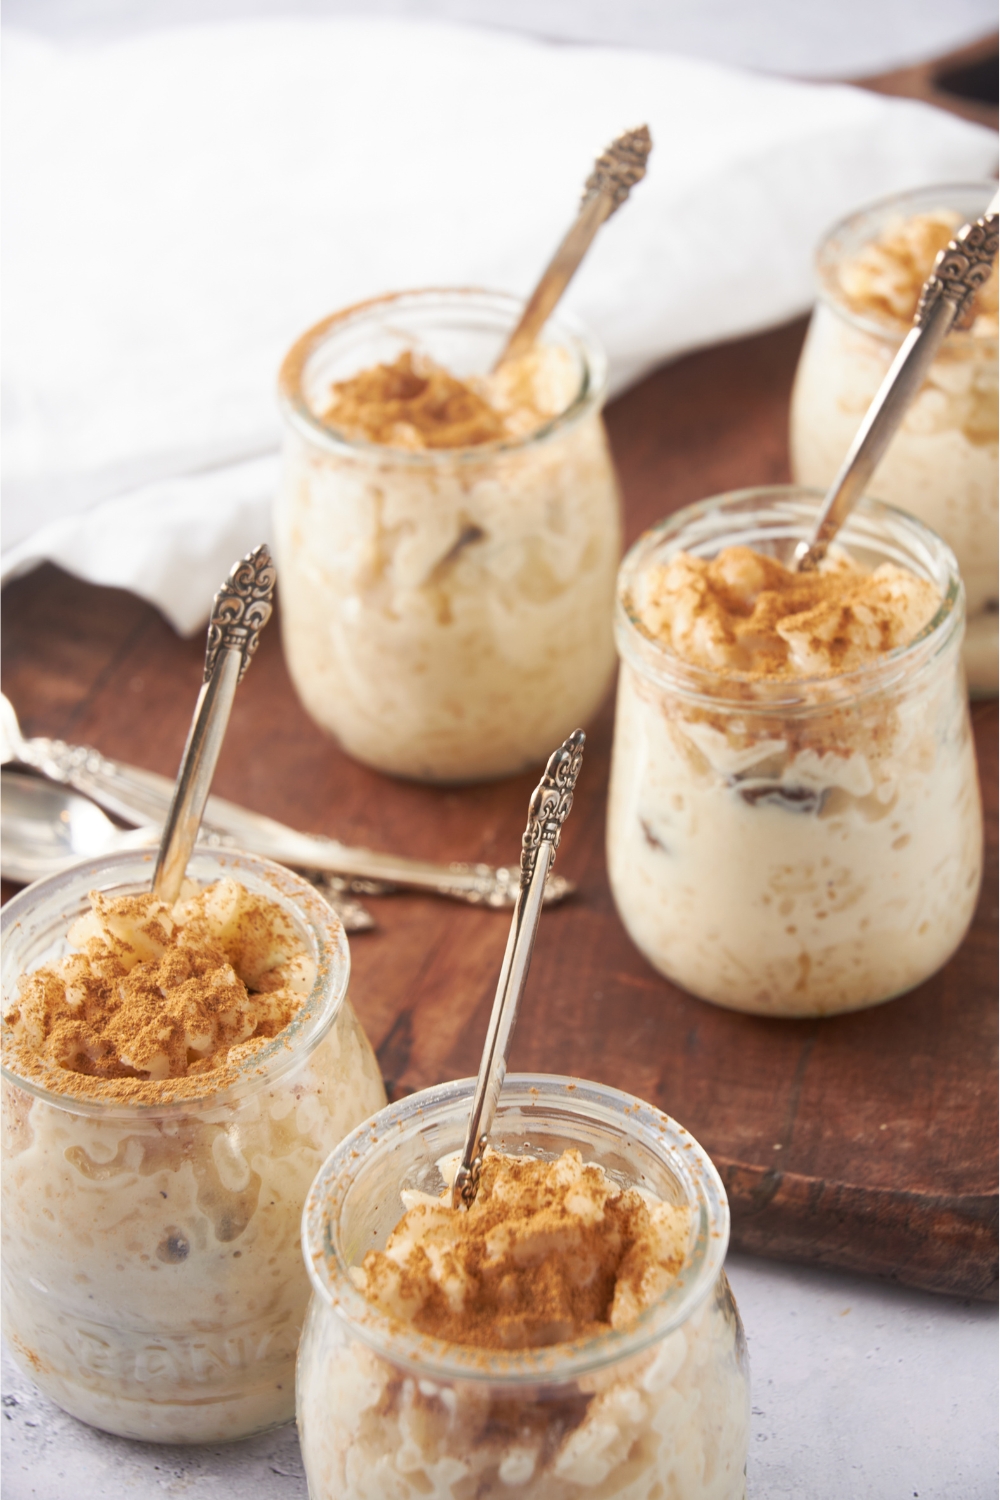 Jars with rice pudding and spoons in each jar.